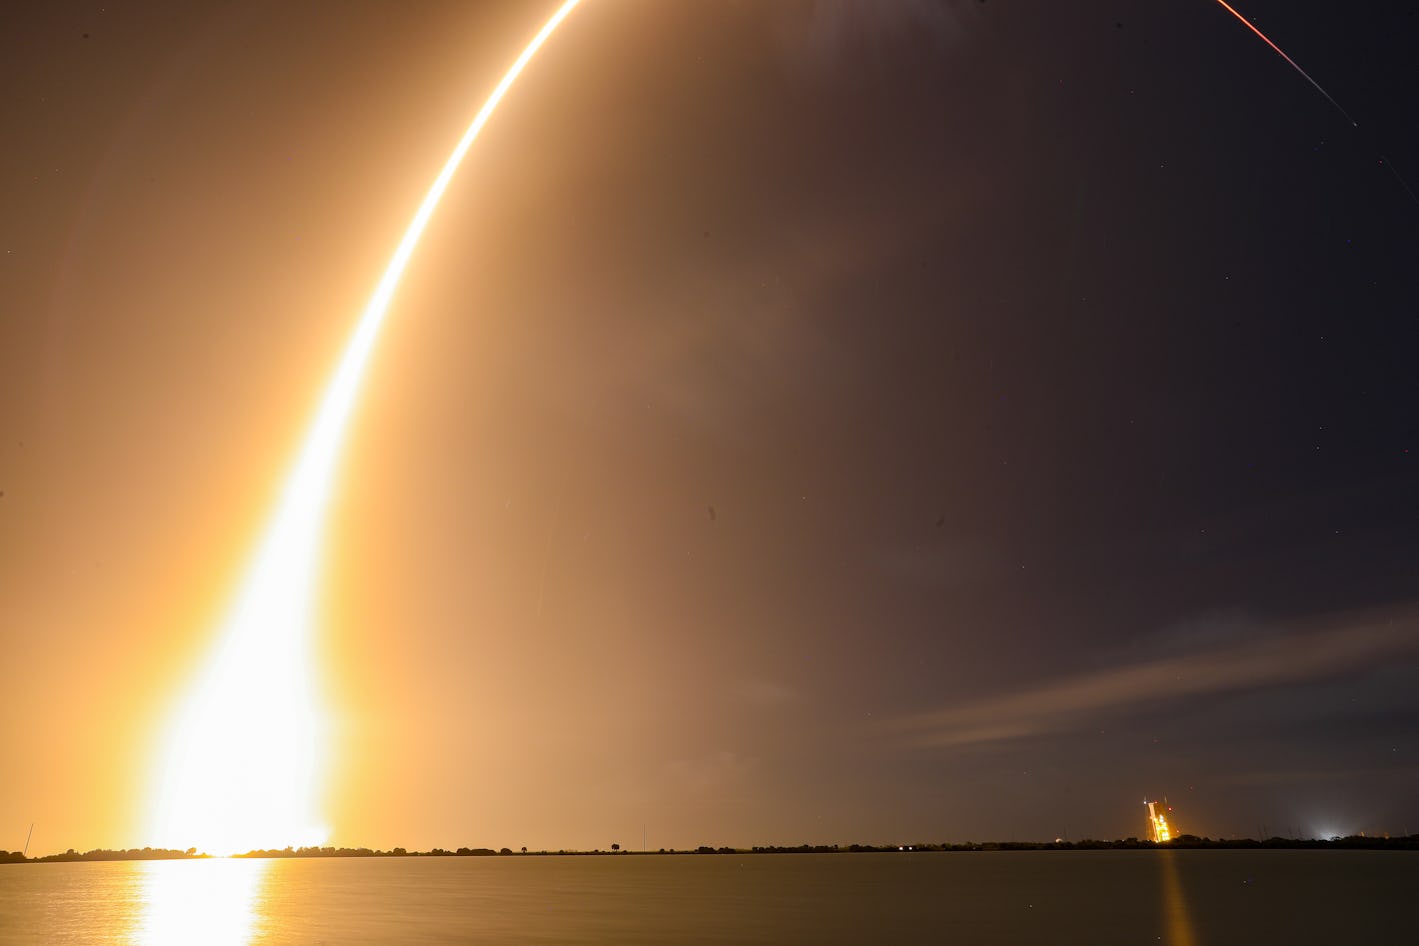 Impressive SpaceX video shows its Mars-bound rocket’s launch tower